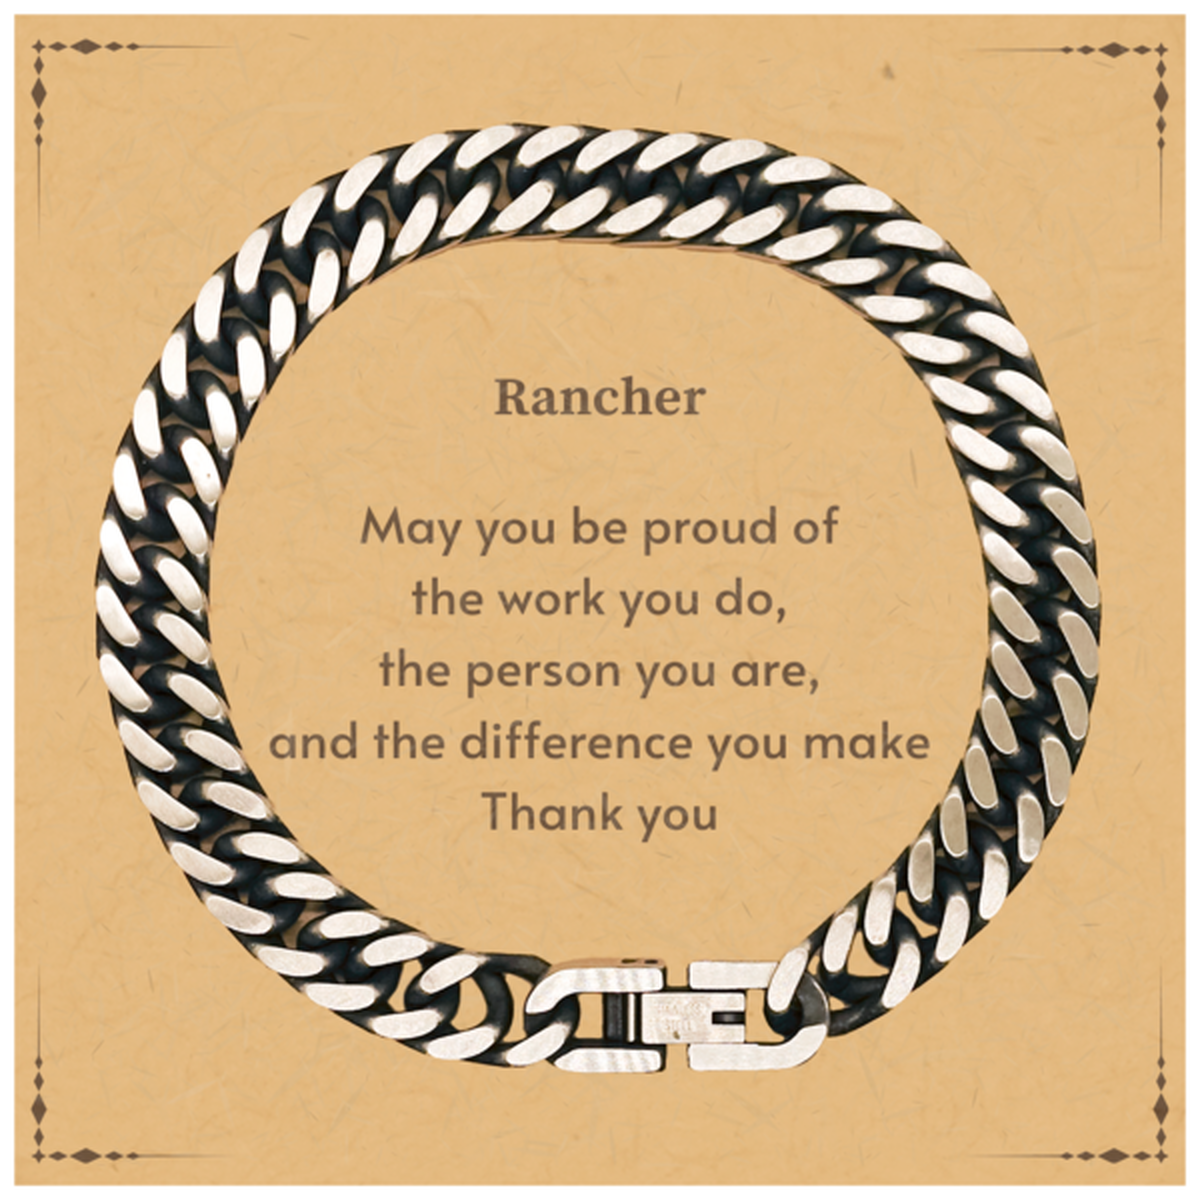 Heartwarming Cuban Link Chain Bracelet Retirement Coworkers Gifts for Rancher, Rancher May You be proud of the work you do, the person you are Gifts for Boss Men Women Friends